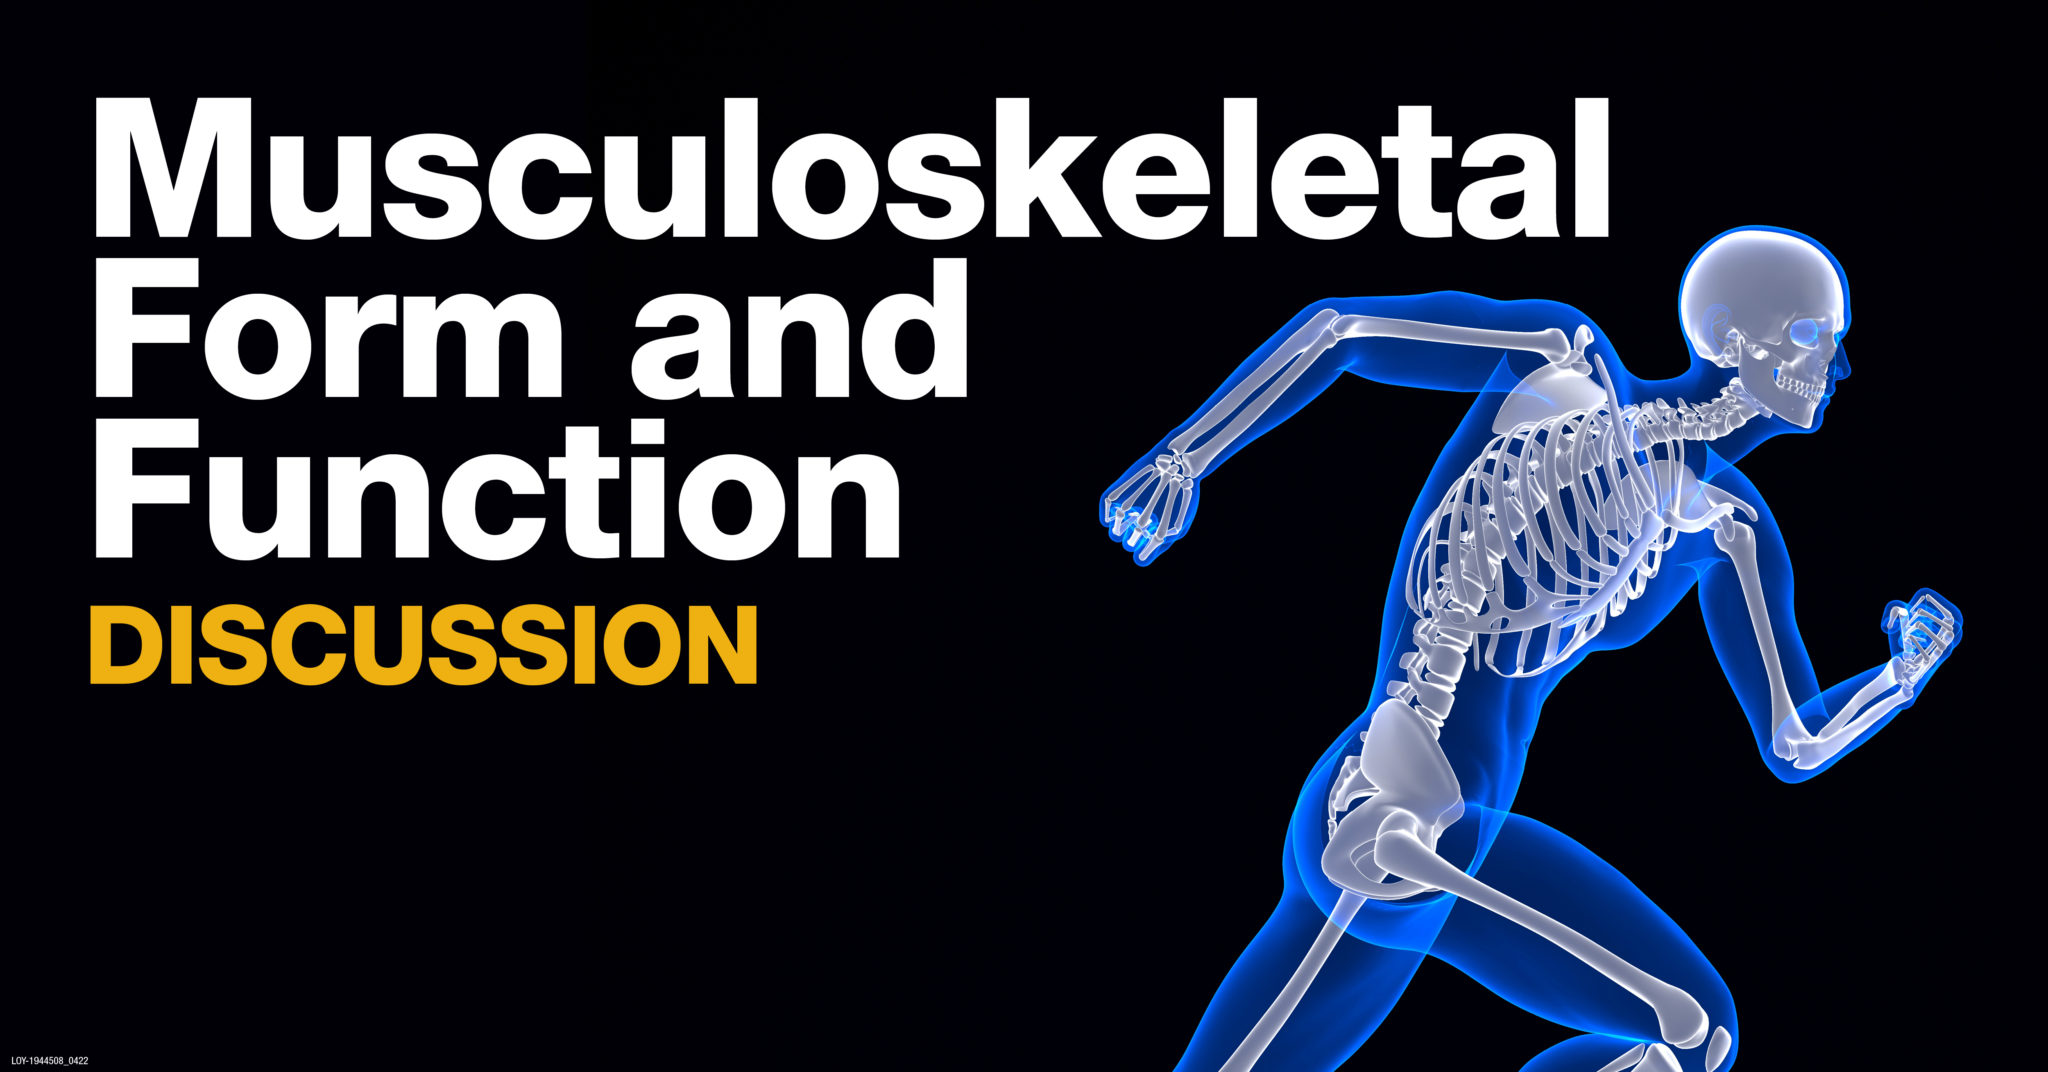 Musculoskeletal Form and Function Discussion